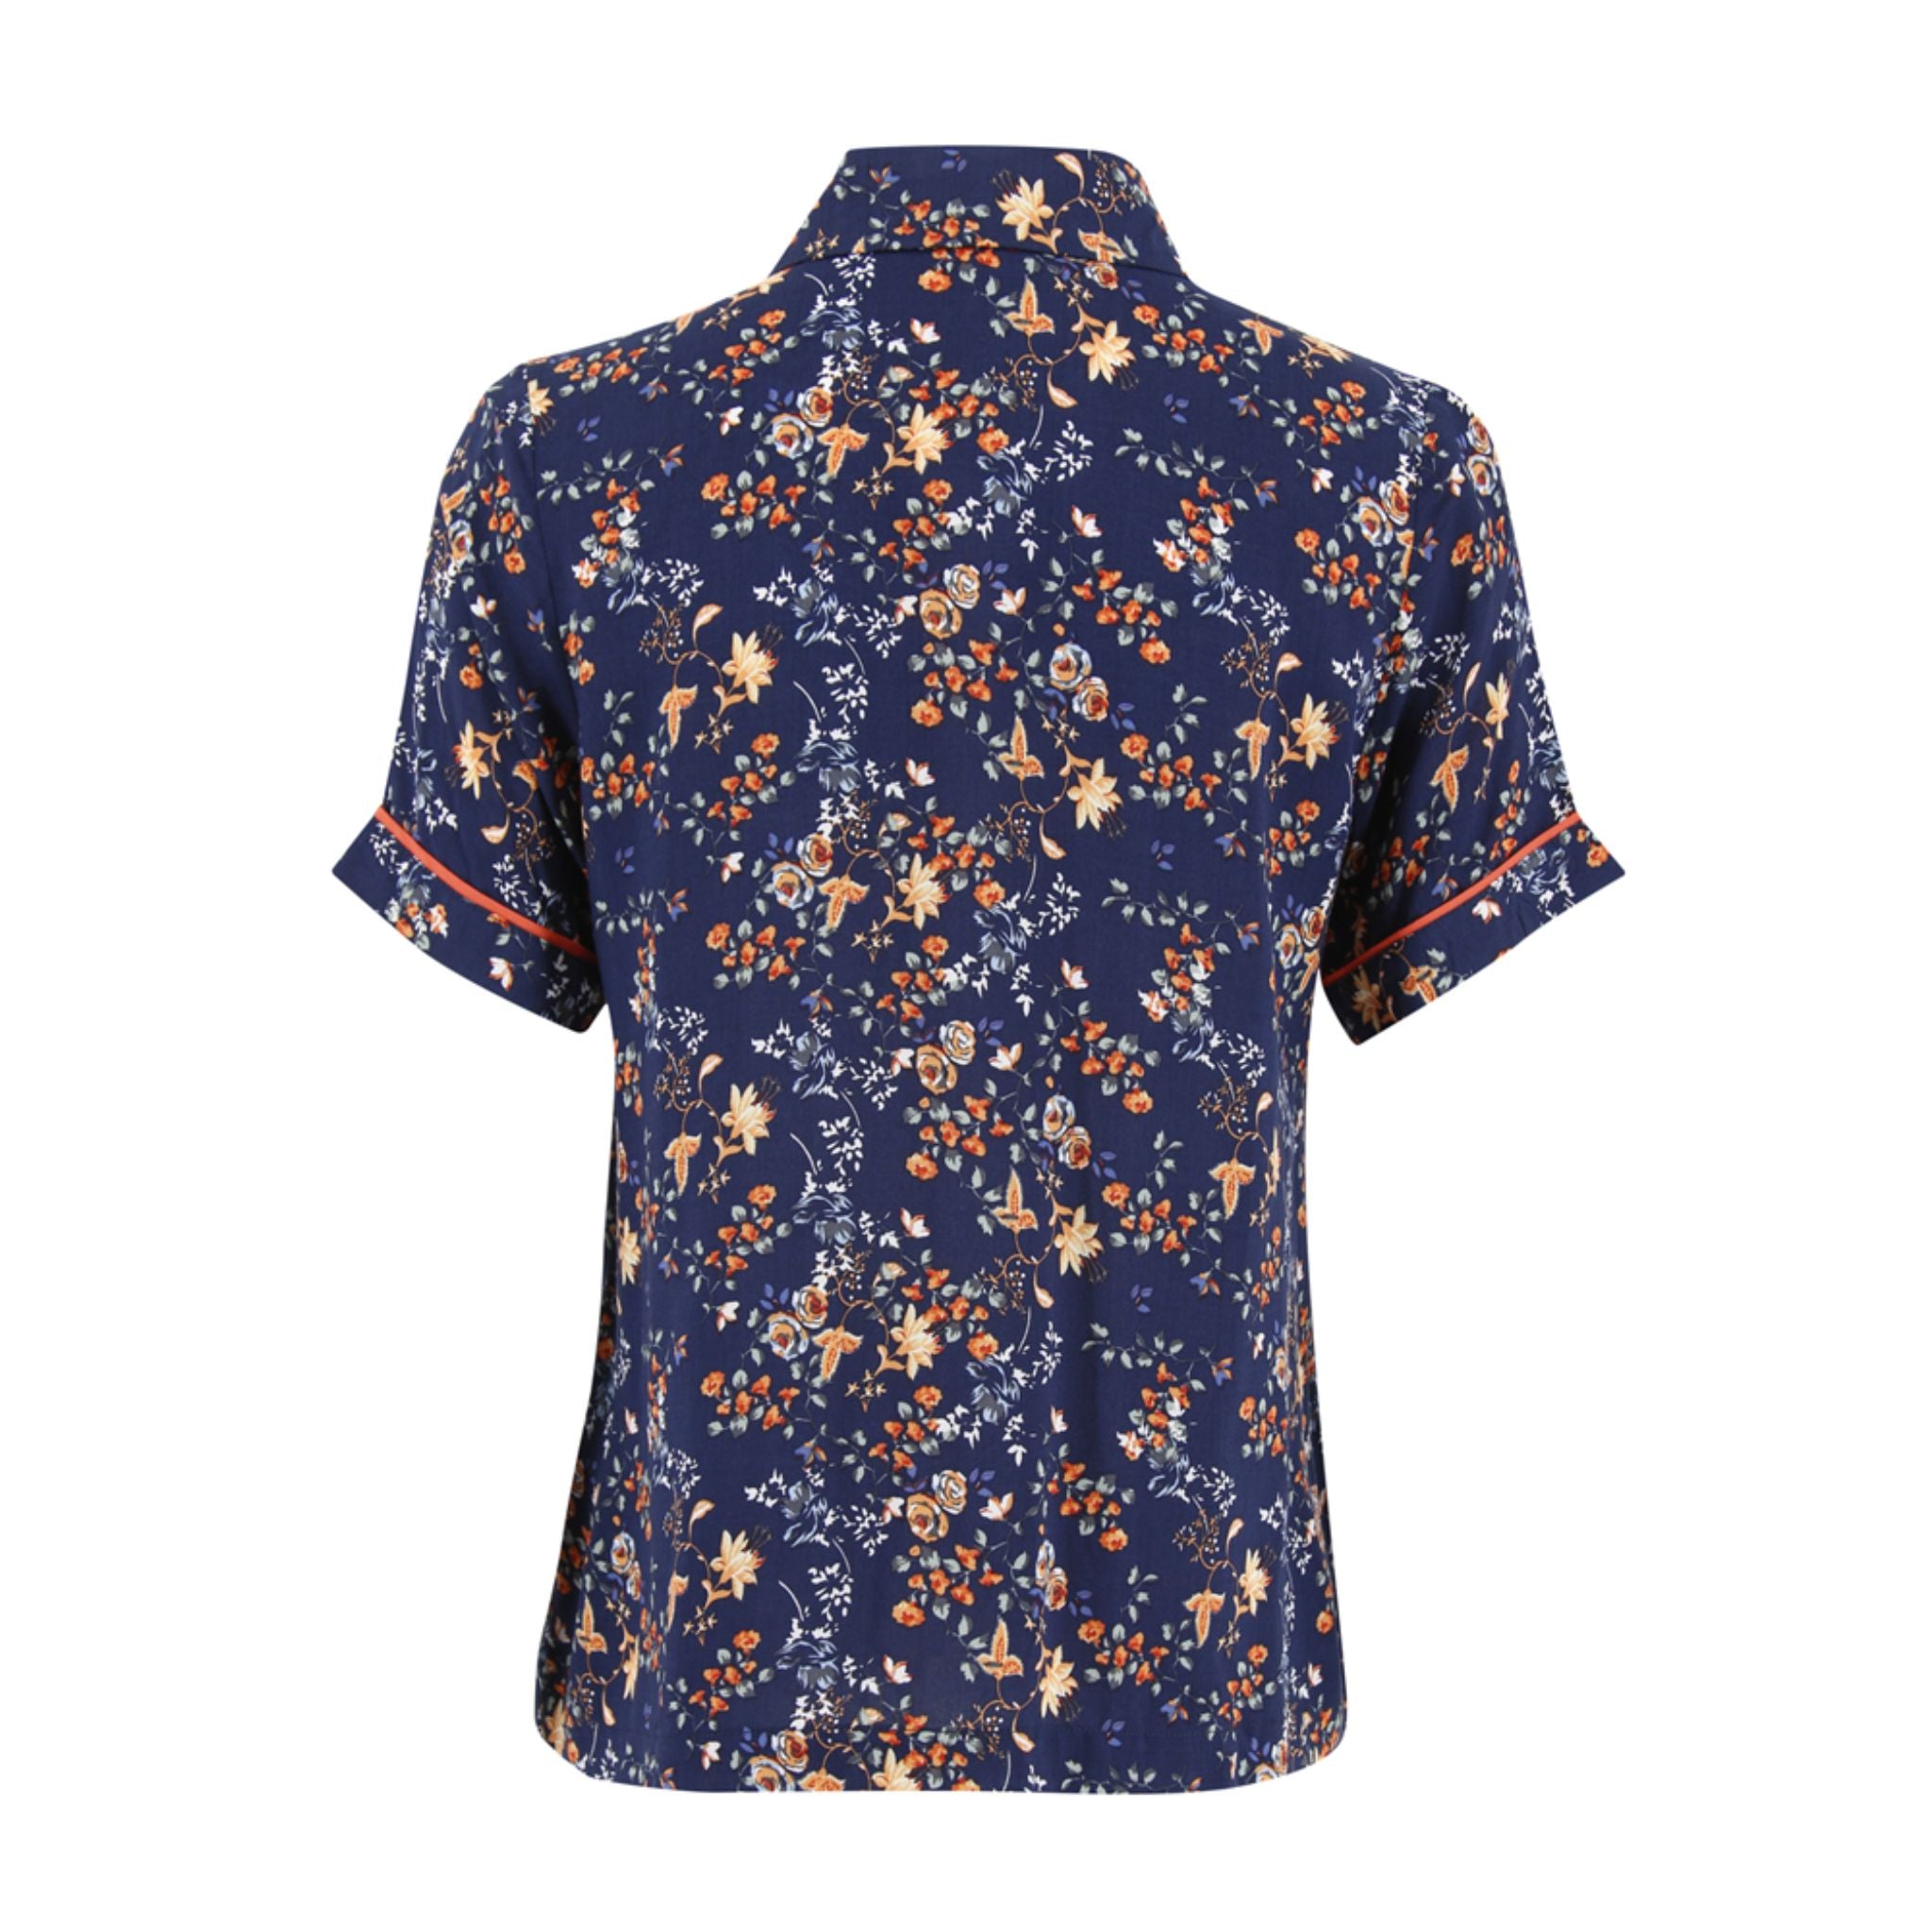 ENRO Mix Fabric Button Down With Piping Detail Blue Blouse - Printed